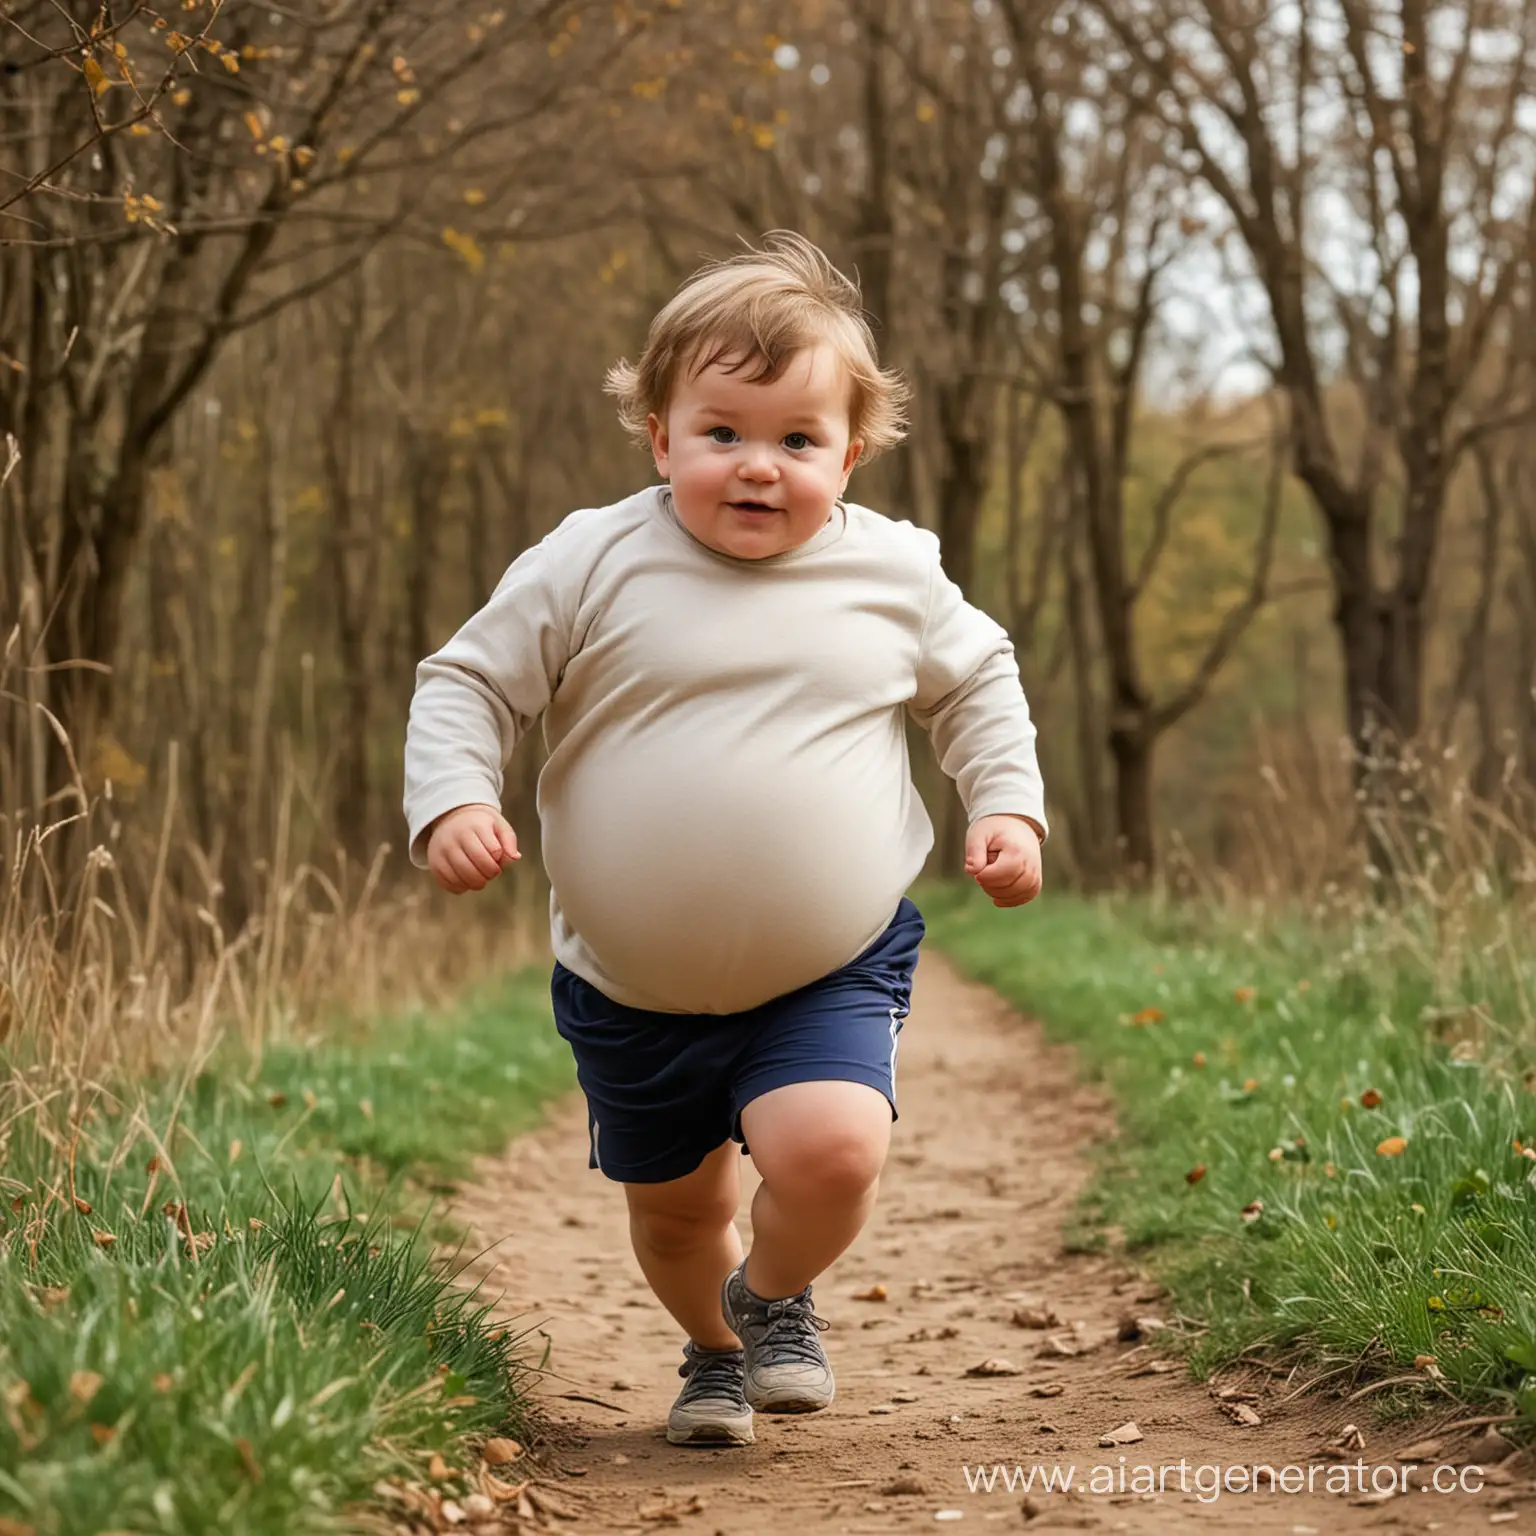 Adorable-Plump-Boy-Running-with-Big-Belly-in-Soft-Focus-Background